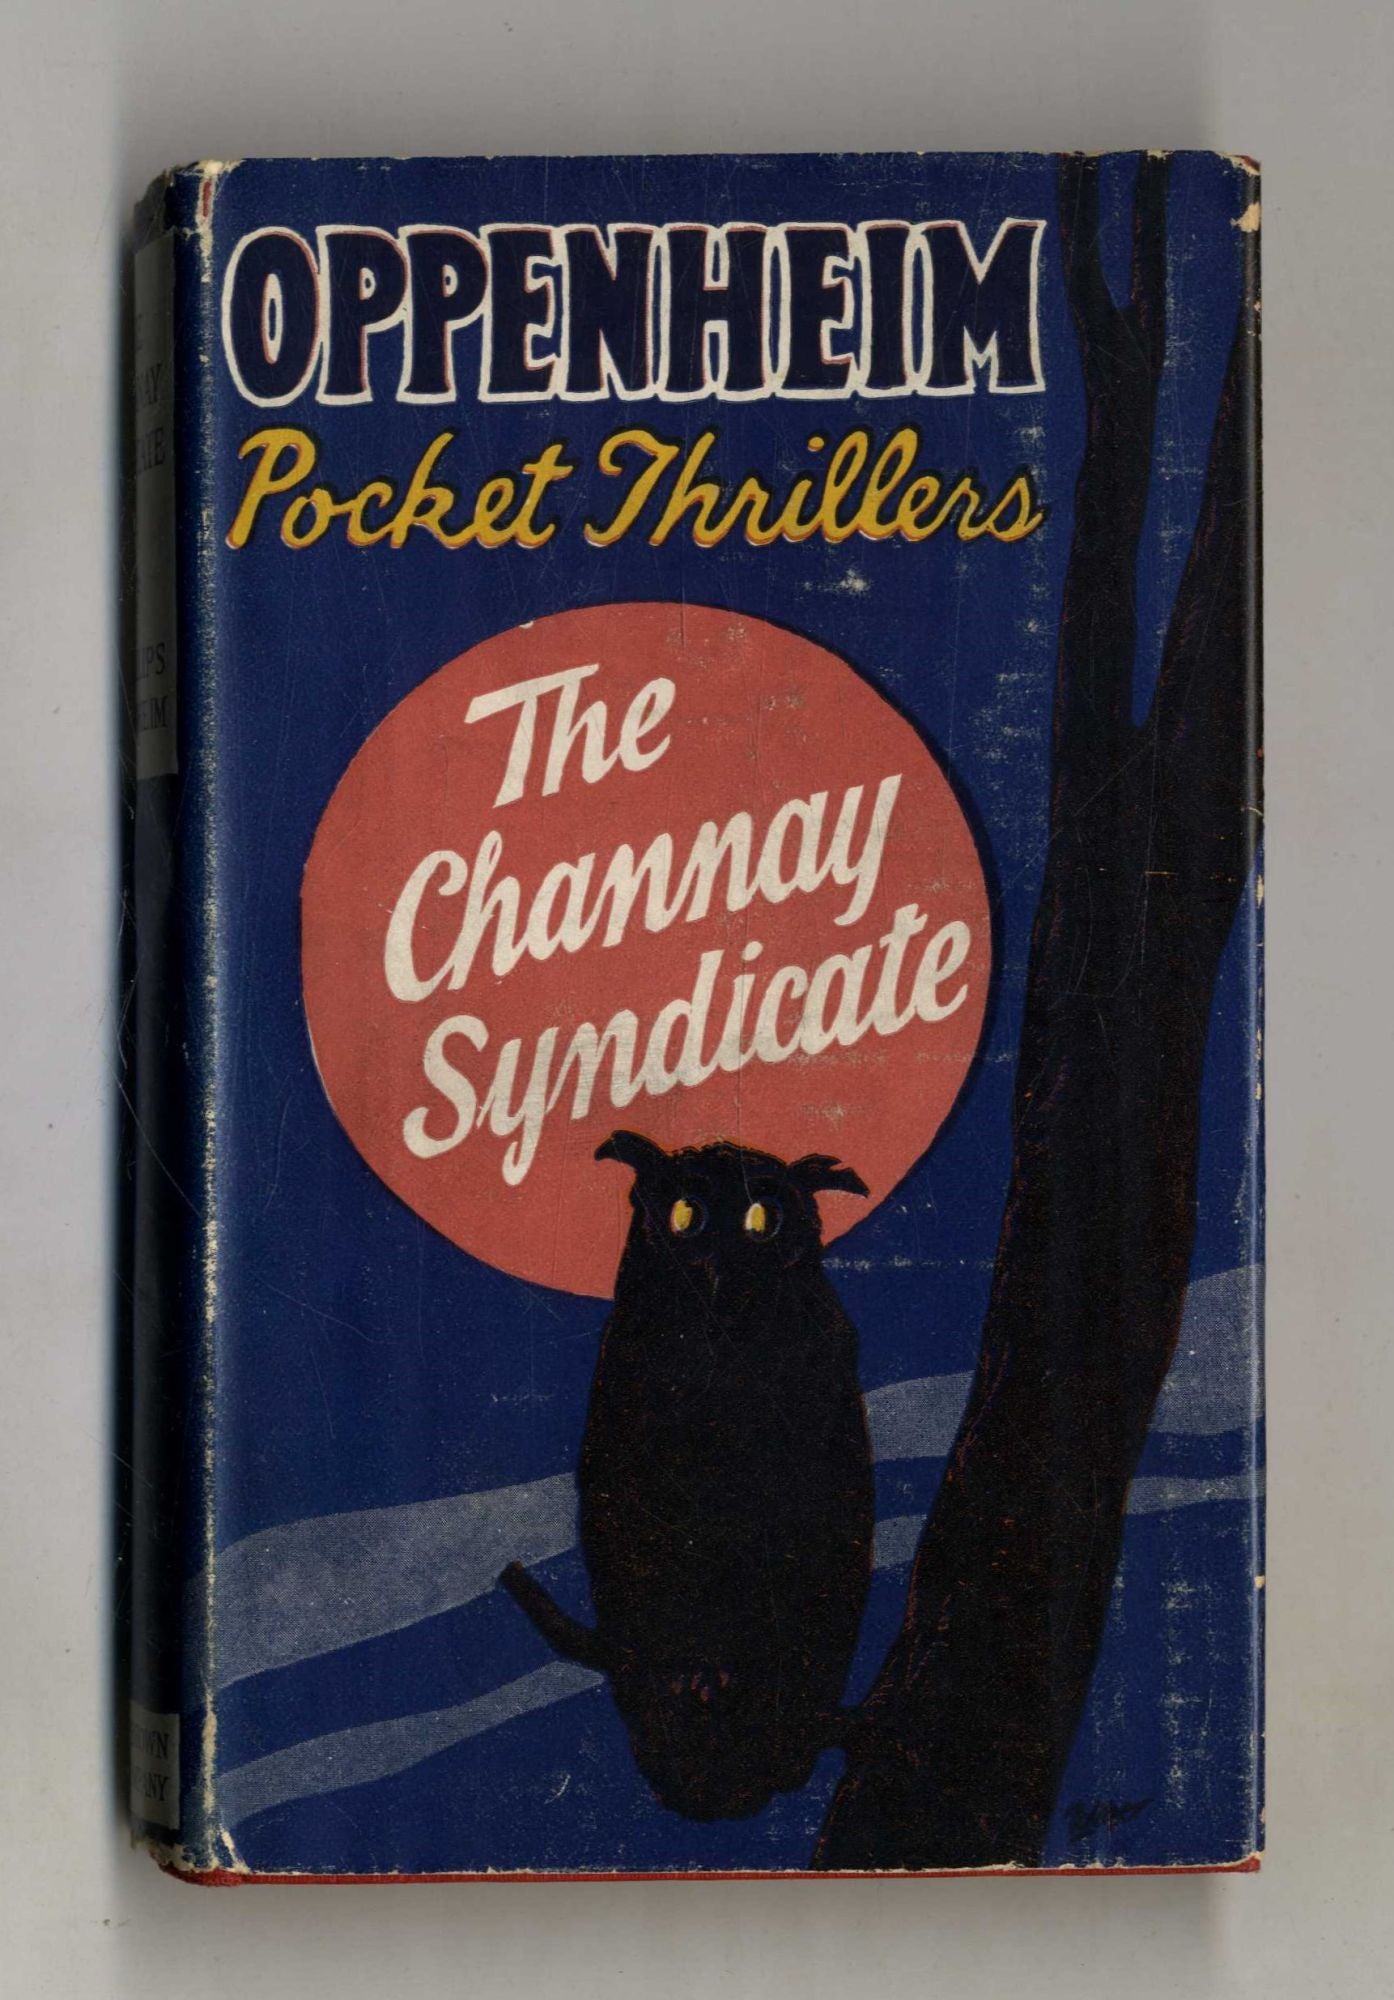 Book #160260 The Channay Syndicate - 1st Edition/1st Printing. E. Phillips Oppenheim.